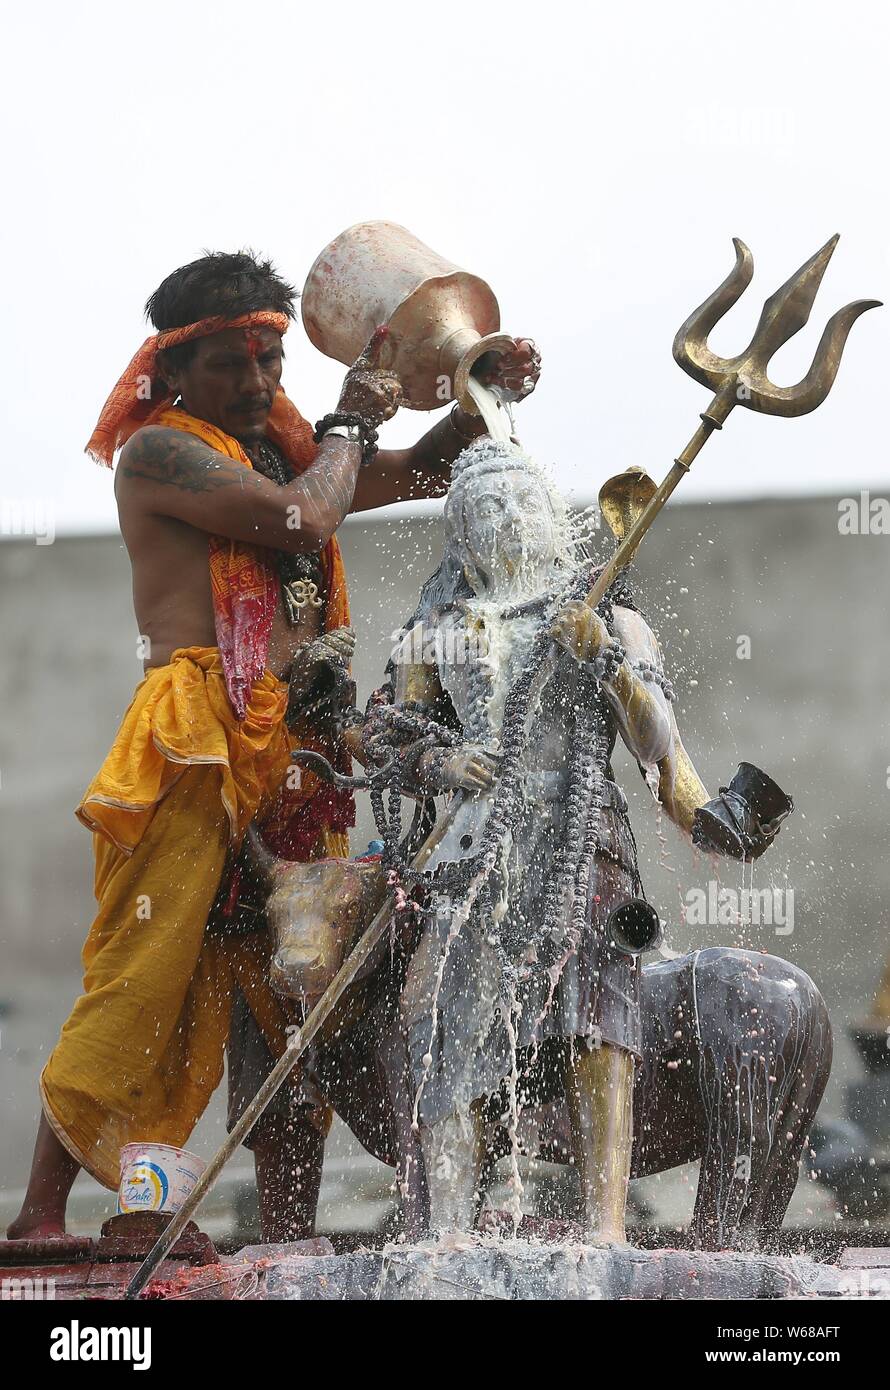 Kathmandu, Nepal. 31st July, 2019. A Hindu priest pours milk as he offers prayers to idol of Lord Shiva at Shiva temple during the holy month of Shrawan. Shrawan month is considered as the holiest month of the year to offer prayers to Lord Shiva for happiness and prosperity. Credit: Archana Shrestha/Pacific Press/Alamy Live News Stock Photo